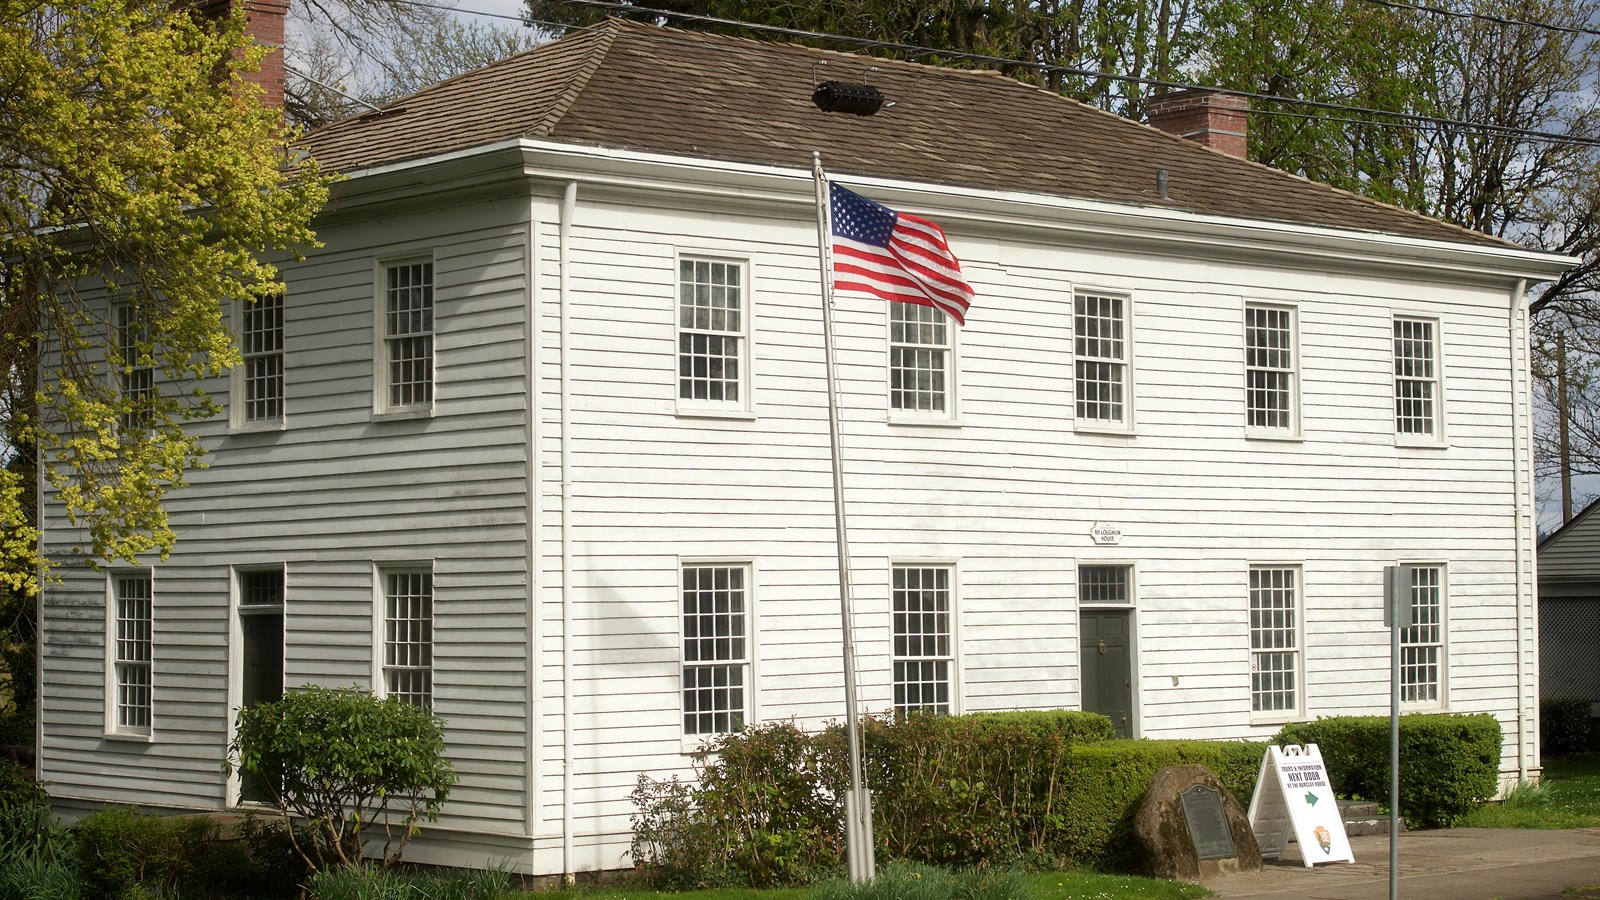 A white square house with an American flag on a flagpole outside.